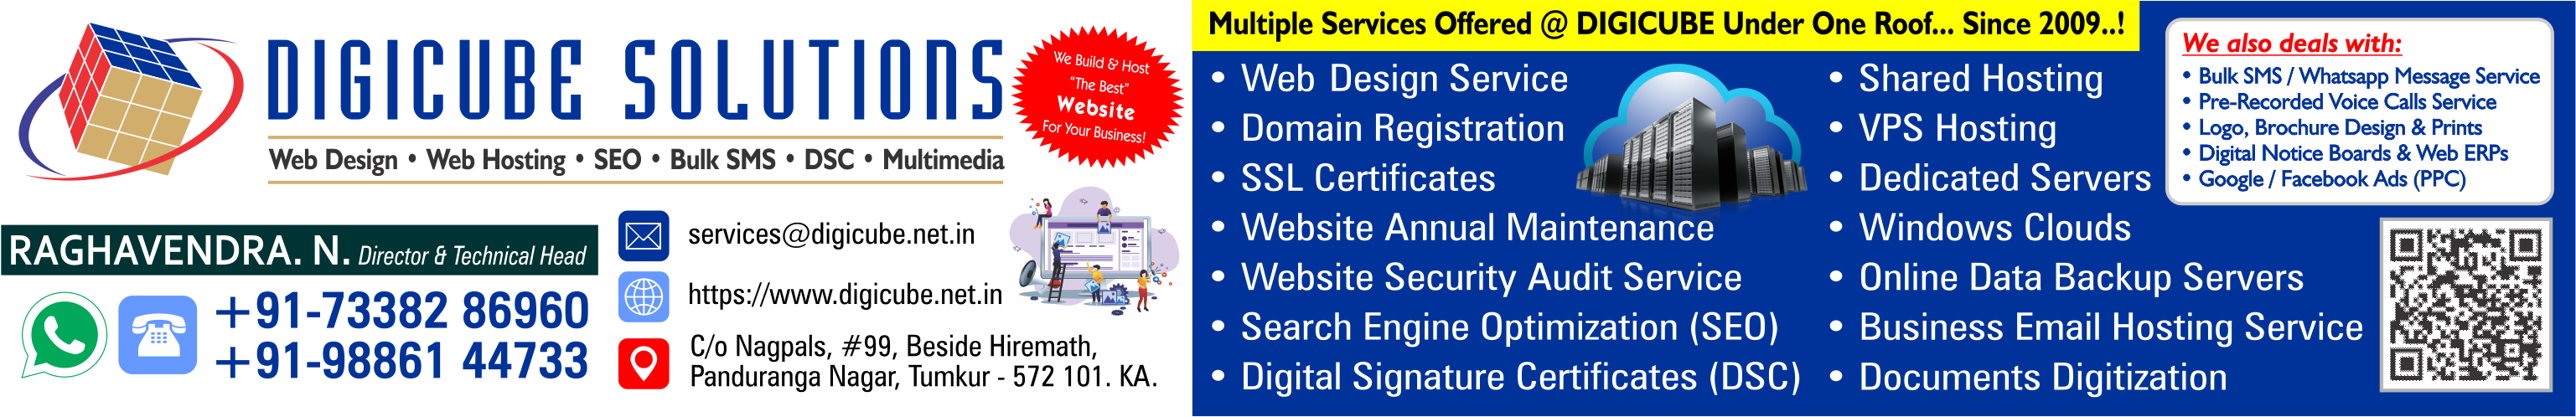 Best Web Design and Hosting Company